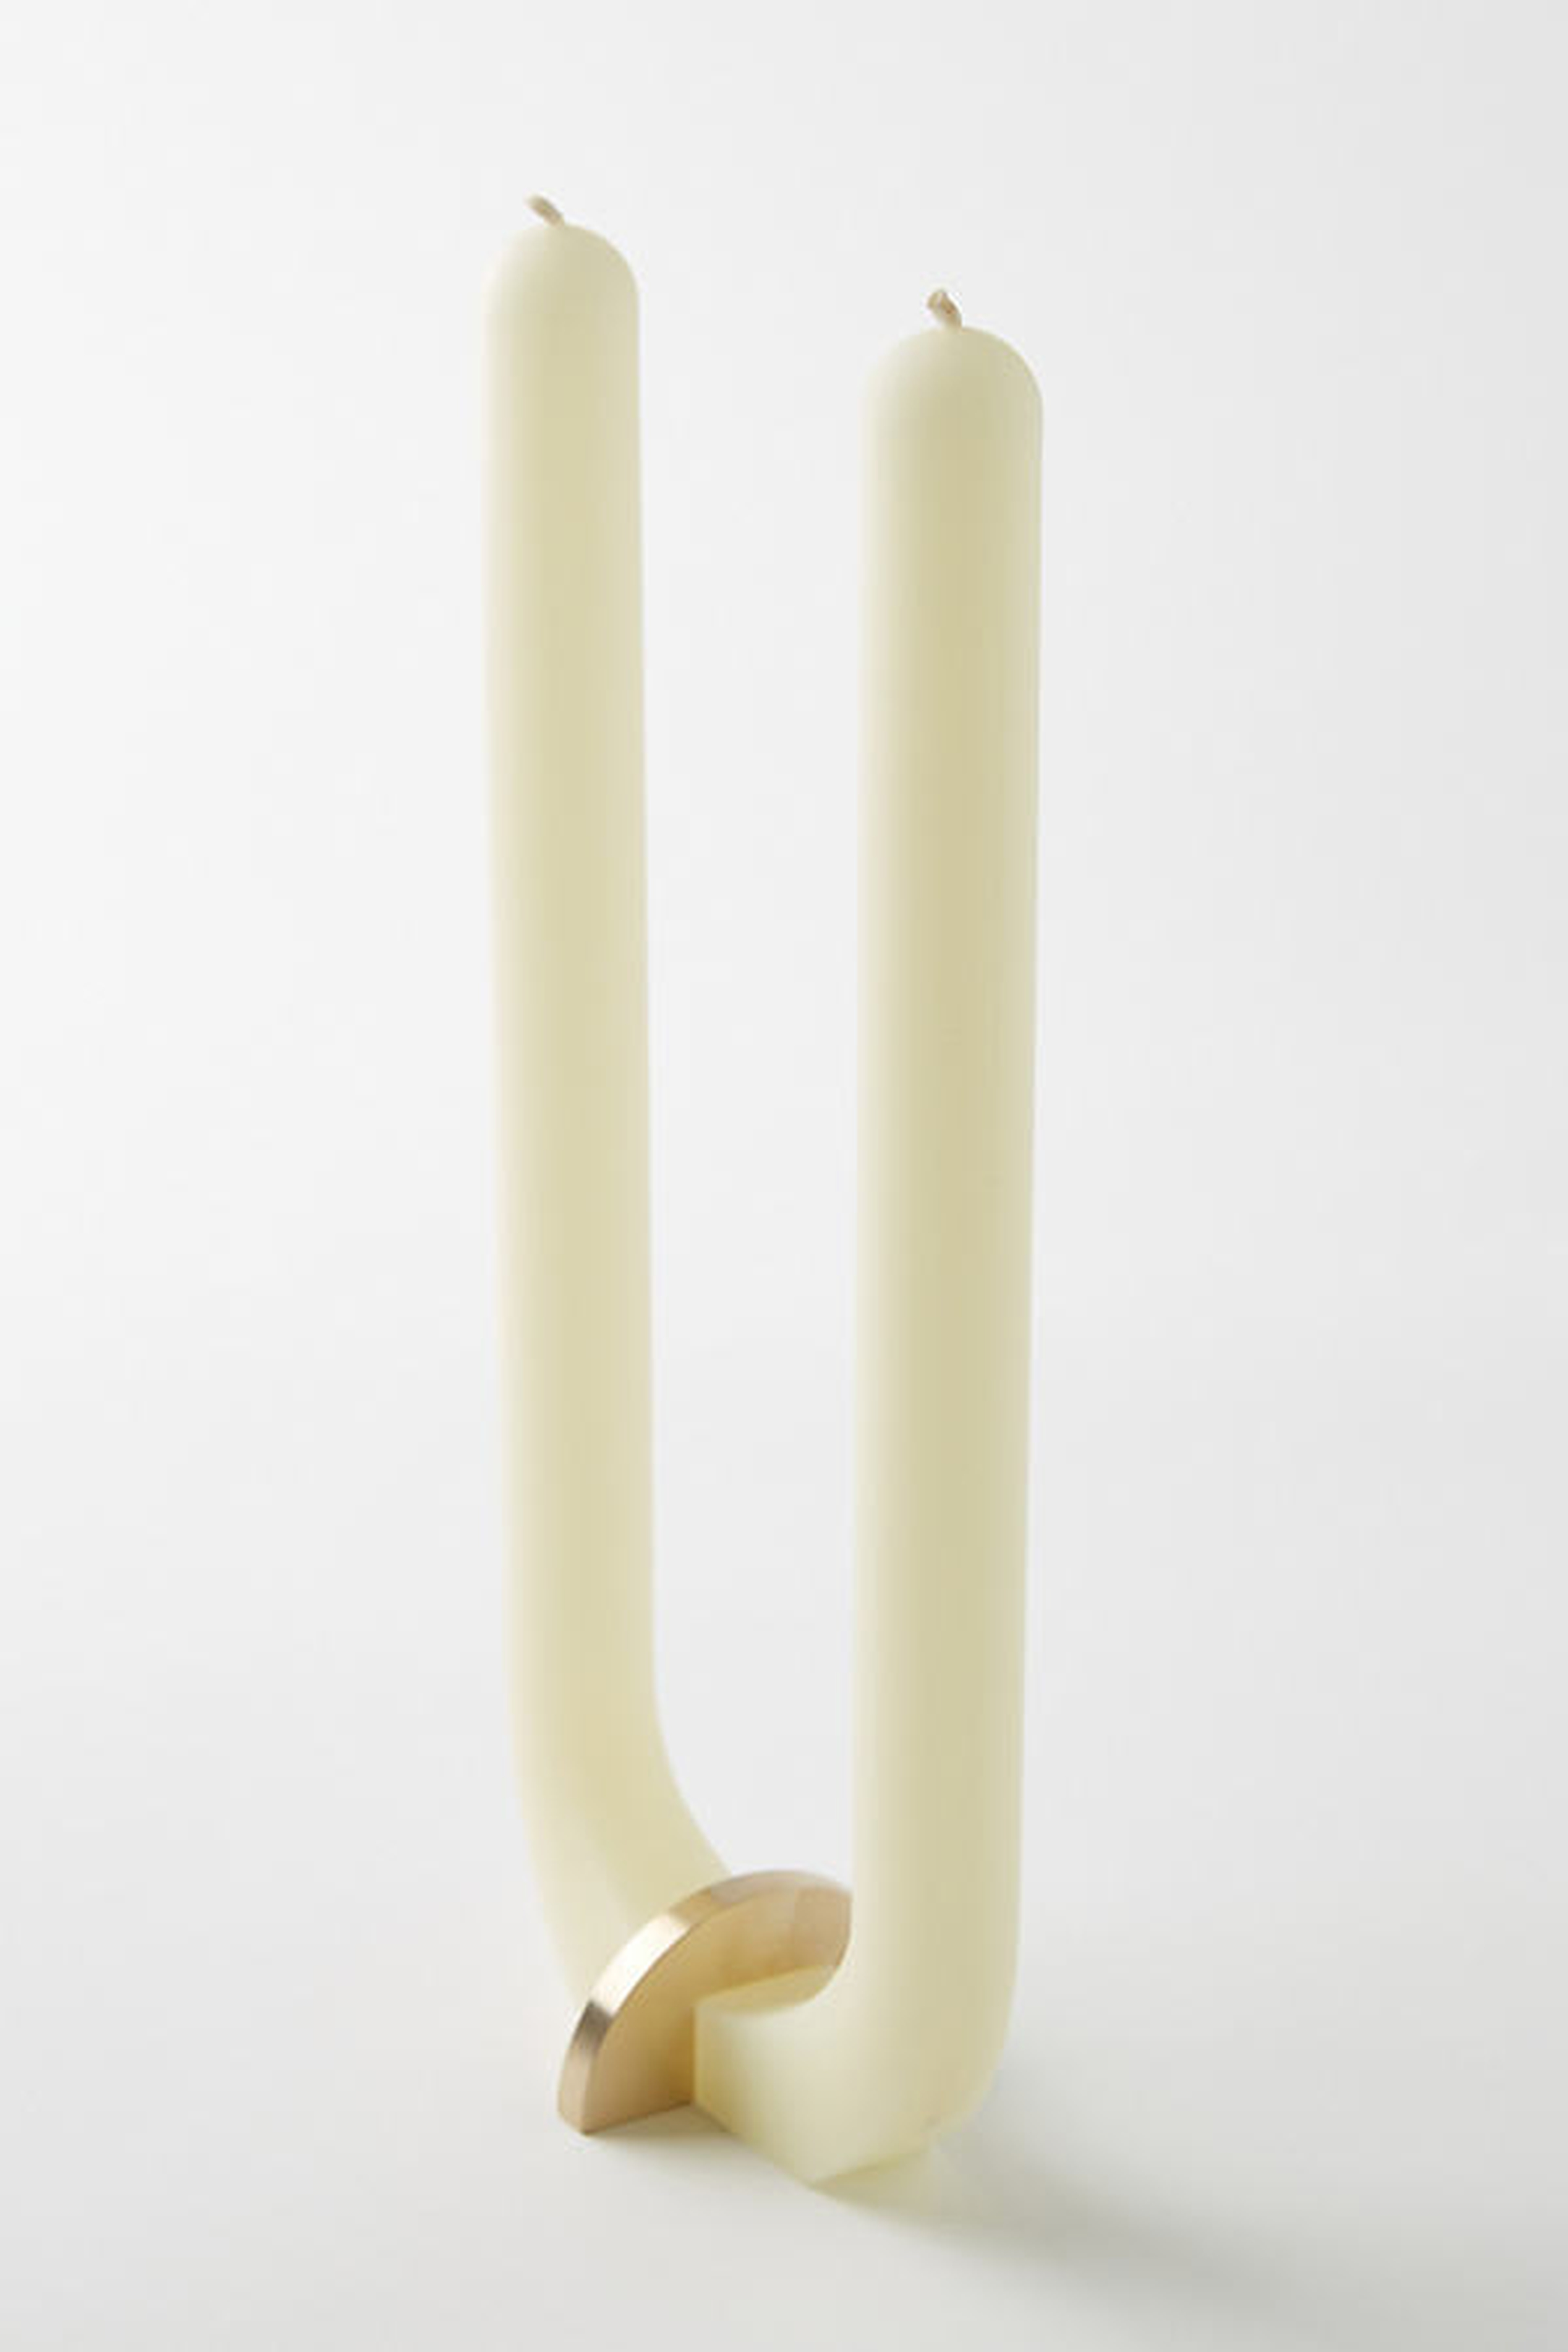 U-Shaped Pillar Candle By Anthropologie in Gold - Anthropologie